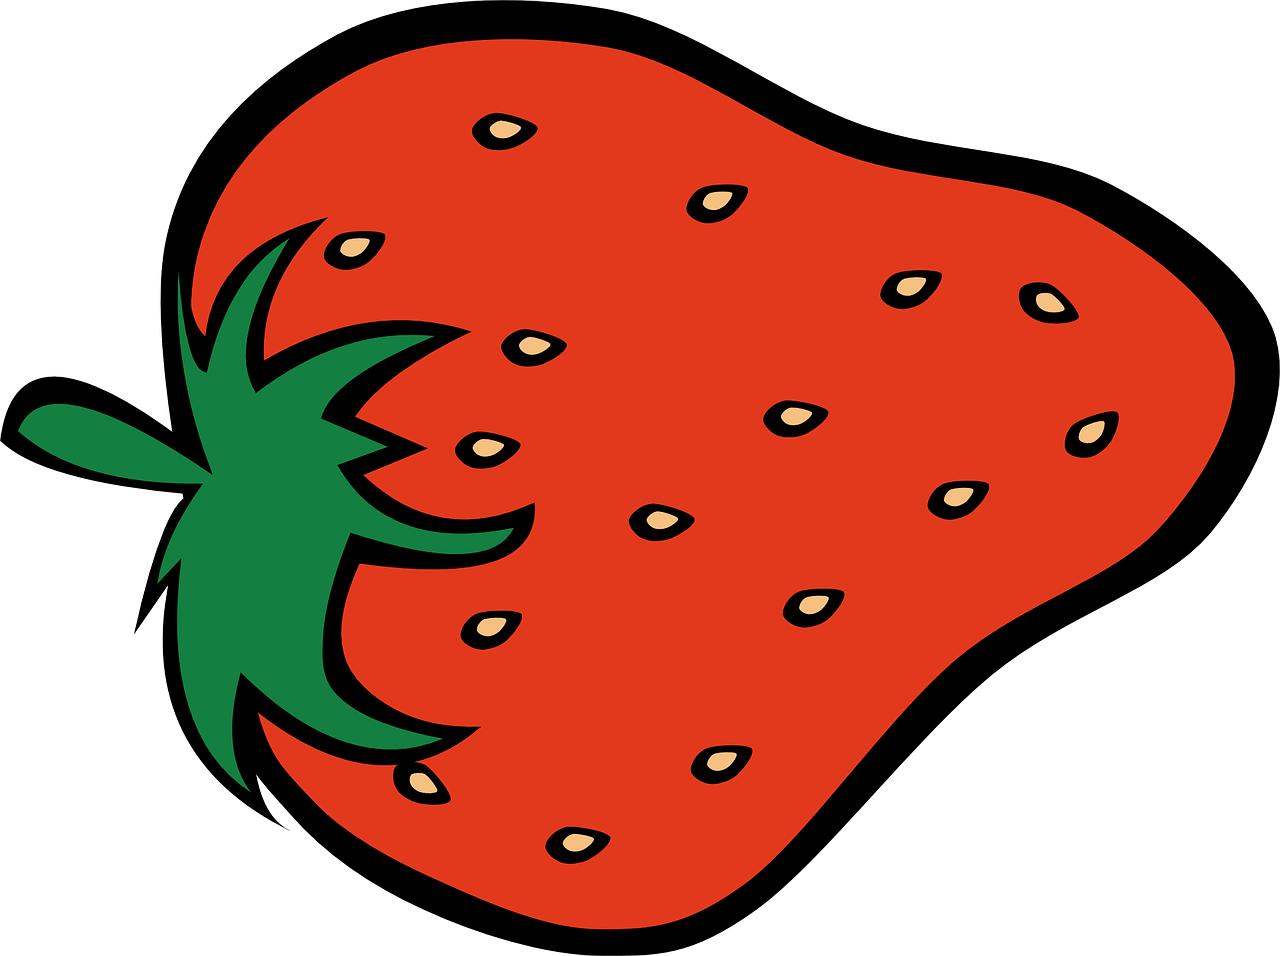 Strawberry Food Fruit Fresh Transparent Image - Clipart Of A Strawberry (1280x956)